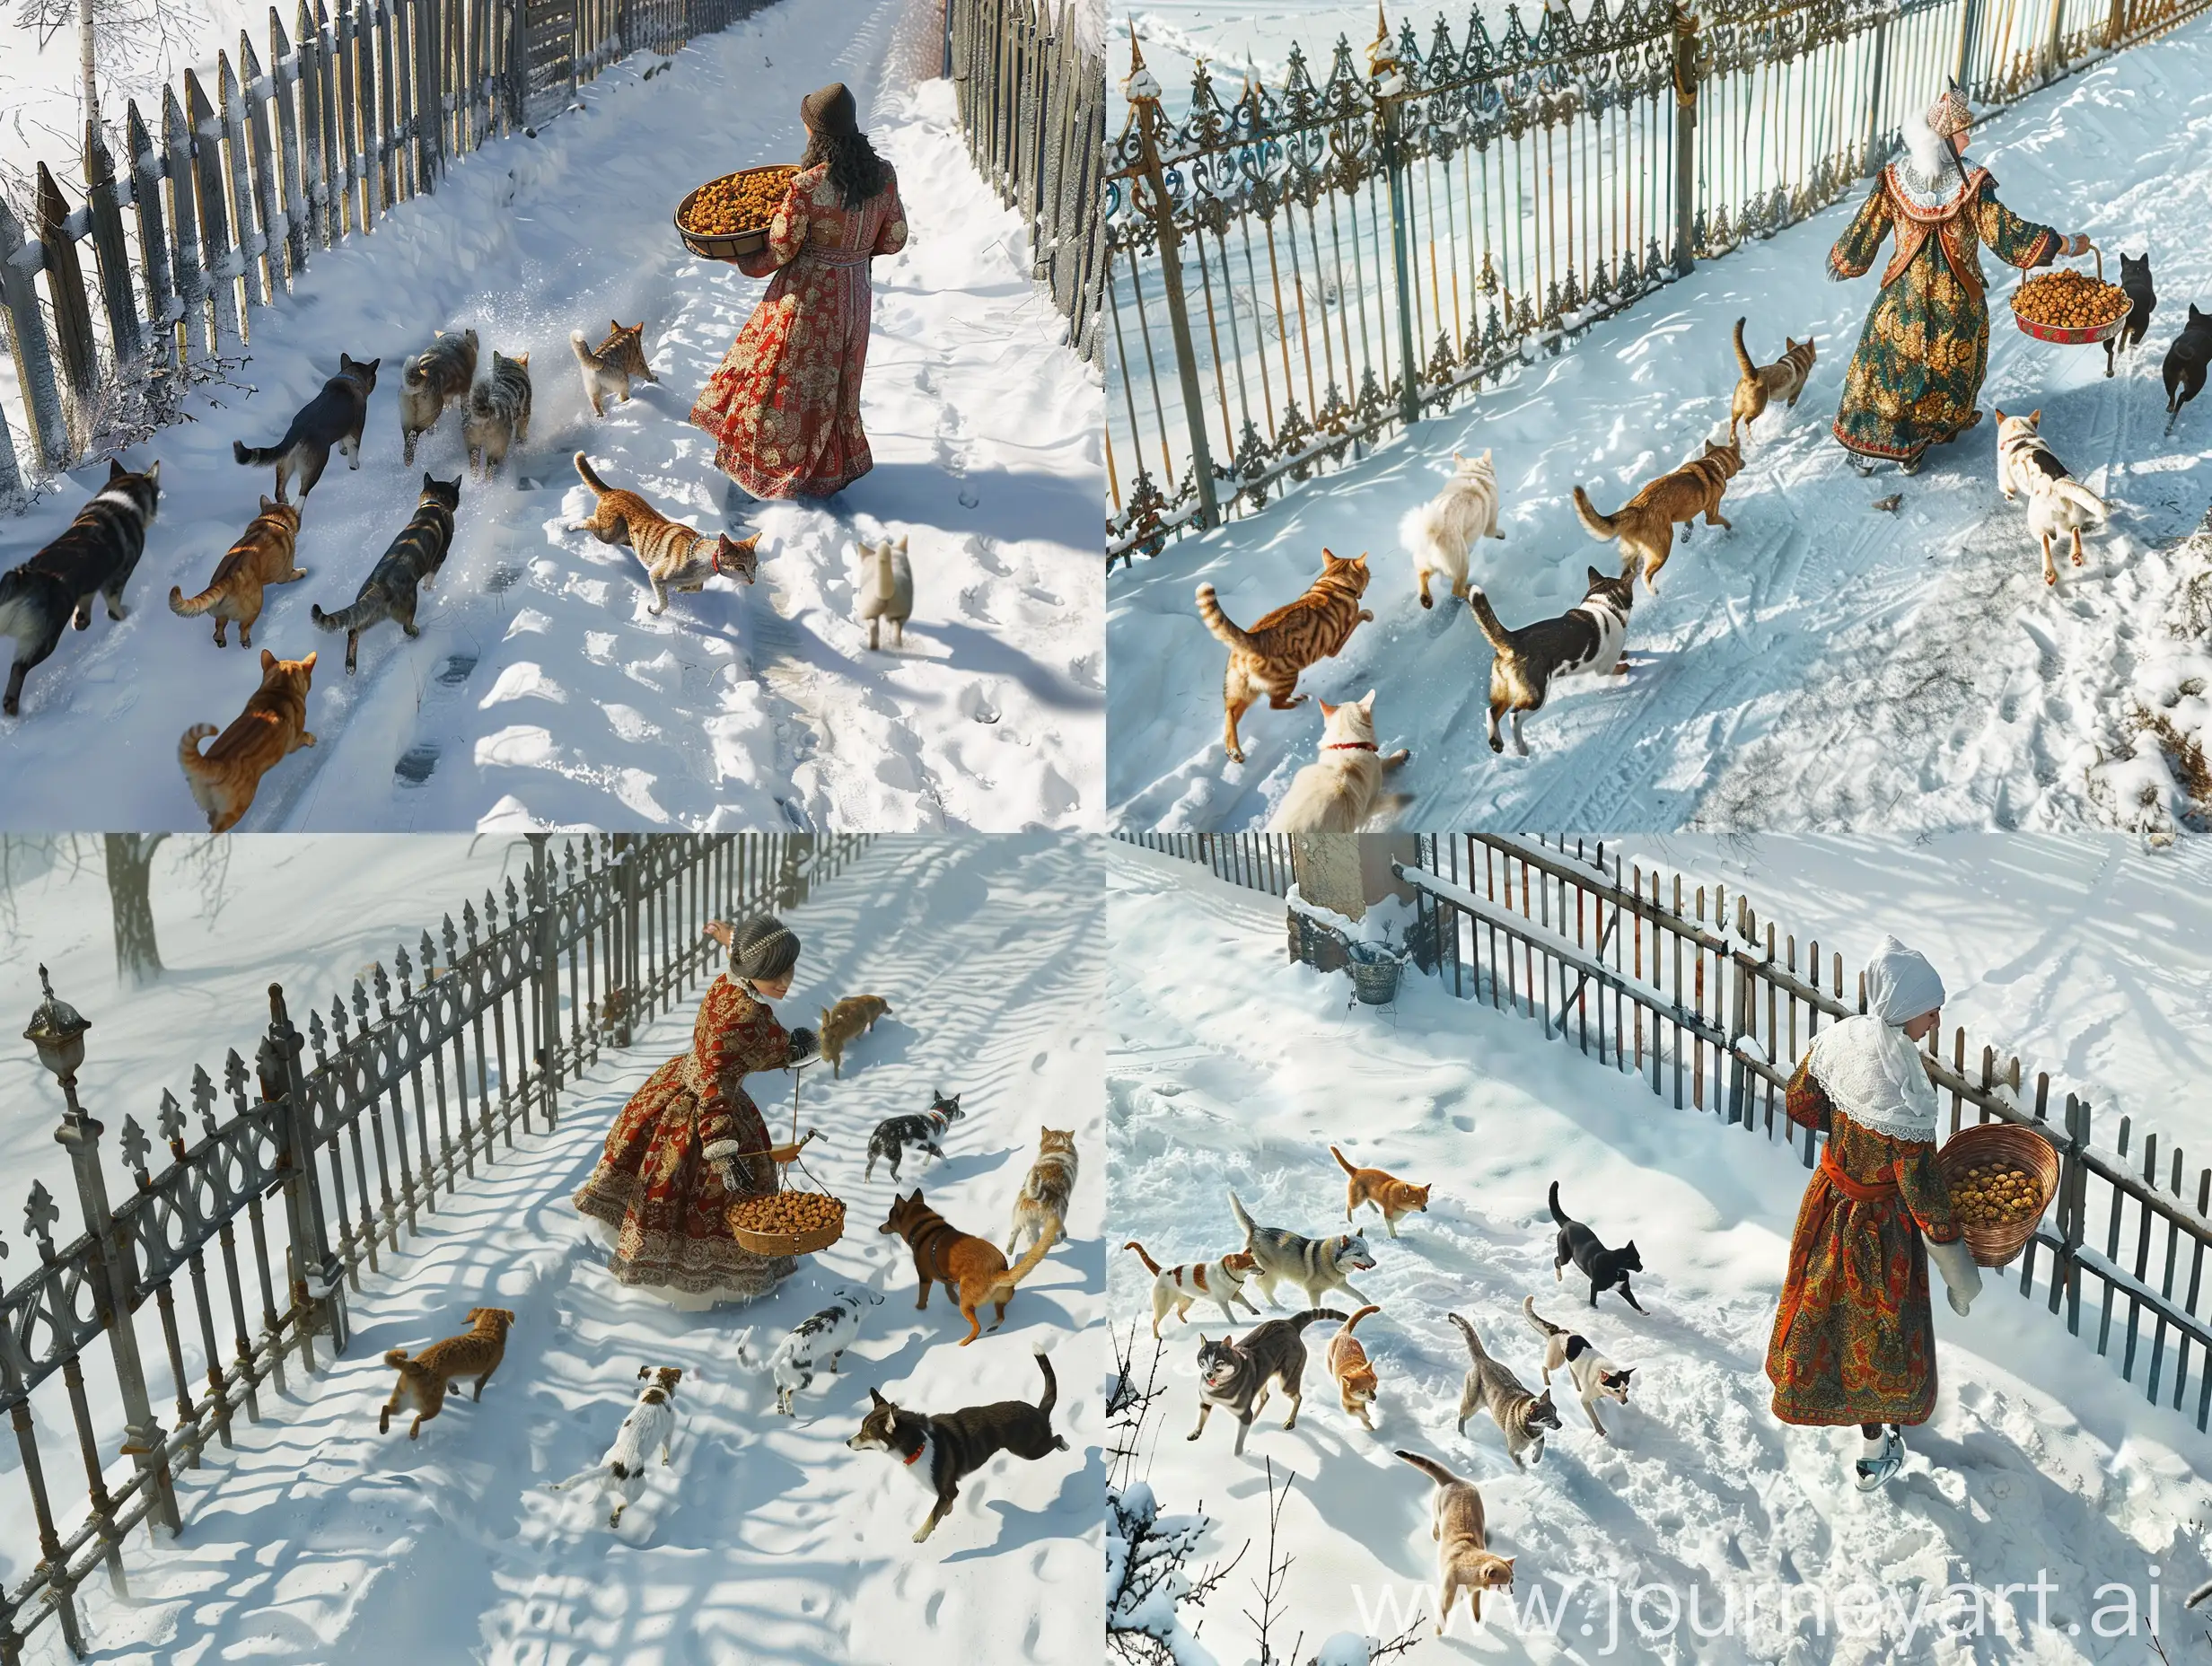 Elegant-Lady-Feeding-Cats-Amid-Snow-with-Dogs-in-Pursuit